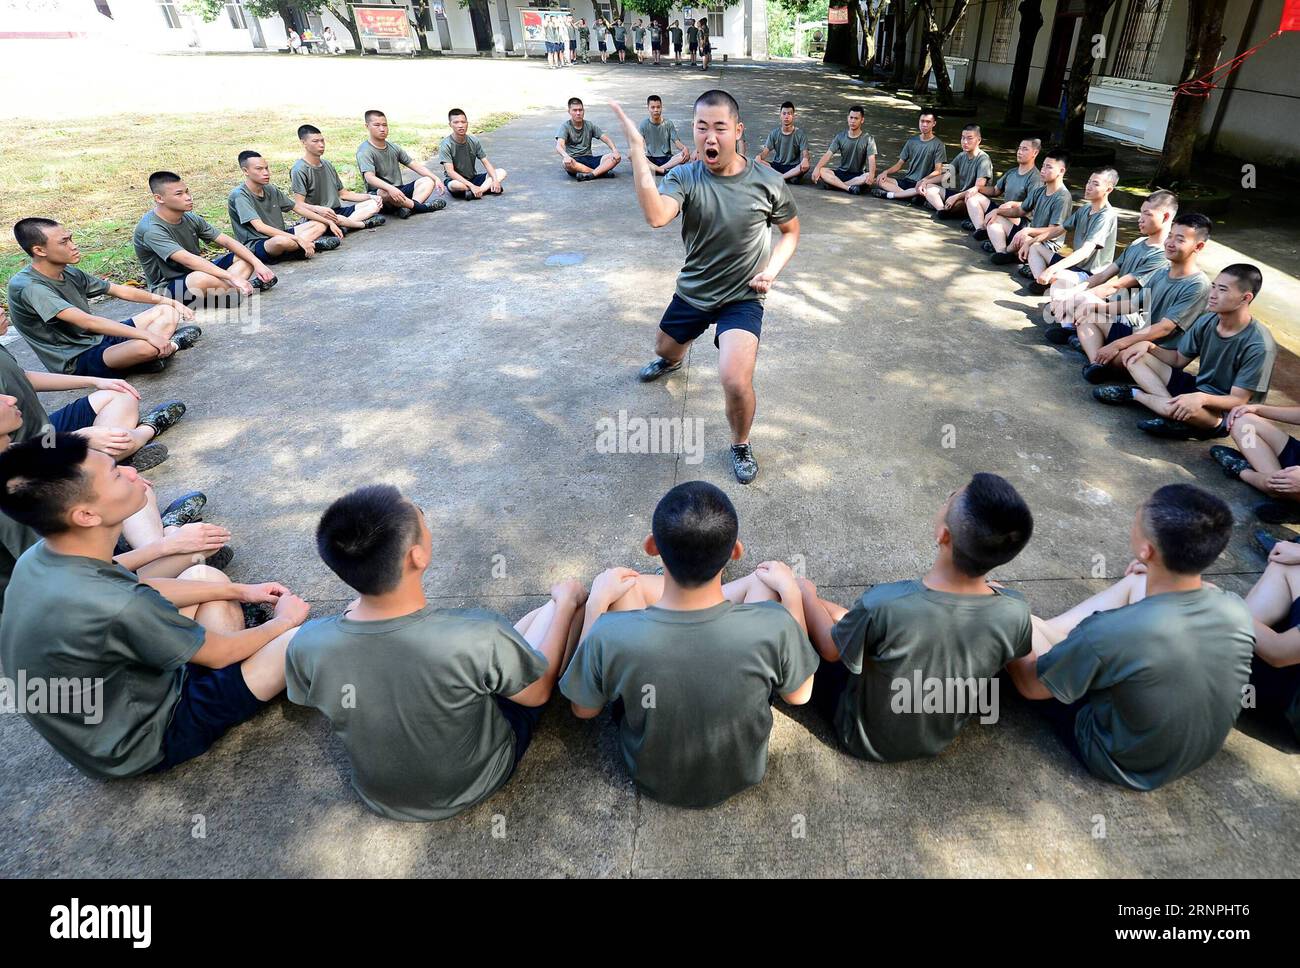 (170830) -- LIUZHOU, Aug. 30, 2017 -- Deng Feng (C) performs military fist as he takes part in a training for joining the army in Liuzhou, south China s Guangxi Zhuang Autonomous Region, Aug. 30, 2017. Deng, 24, who just graduated from Xingjian College of Science and Liberal Arts of Guangxi University, has signed for the army twice. When he was a freshman, Deng Feng was for the first time recruited as a soldier of Guangxi Frontier Corps of Chinese Armed Police and was on service for two years. Deng Feng then left army and went back to Guangxi University until he finished his study. Upon gradua Stock Photo